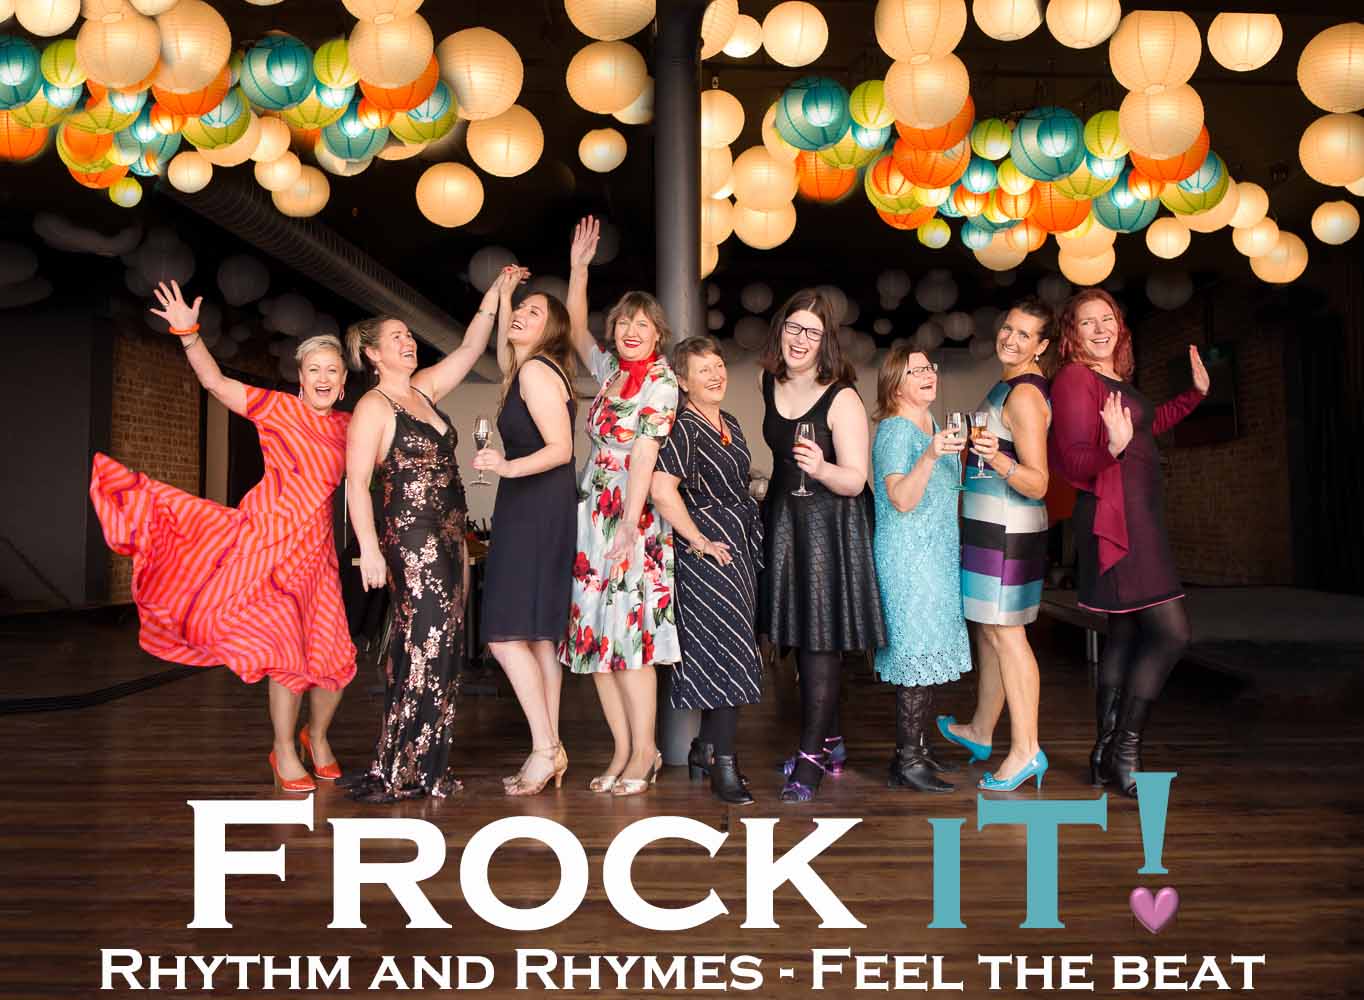 Frock IT Rhythm and Rhymes Dance Party Event in Dunedin 2020